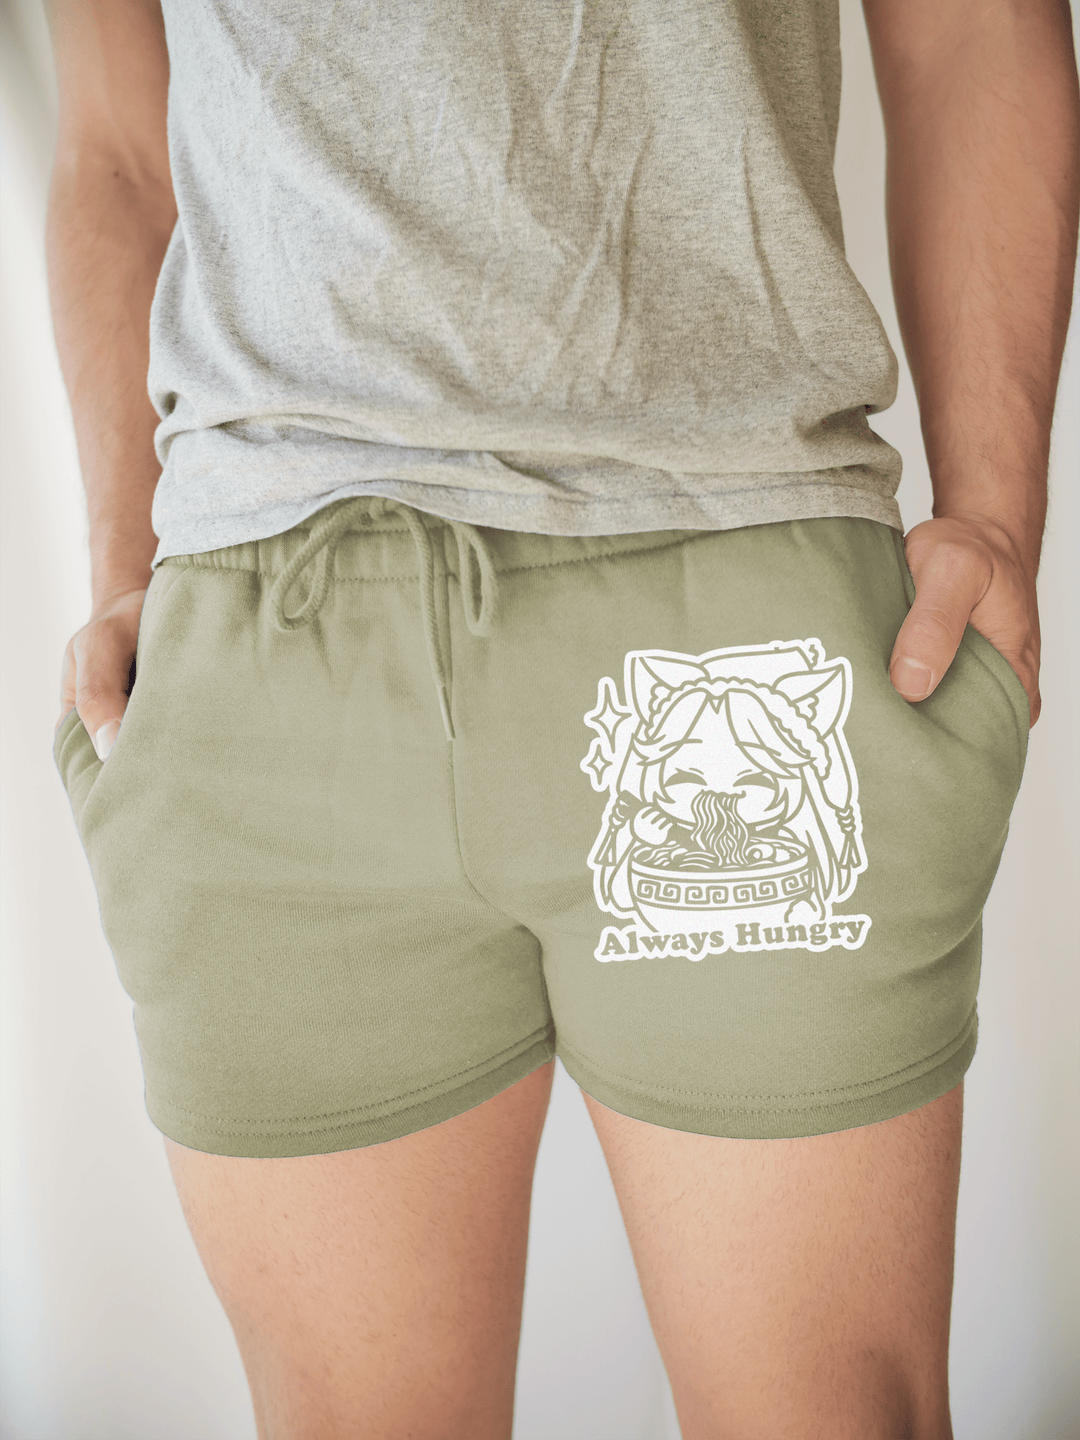 PixelThat Punderwear Shorts Sage / S / Front Always Hungry Men's Gym Shorts